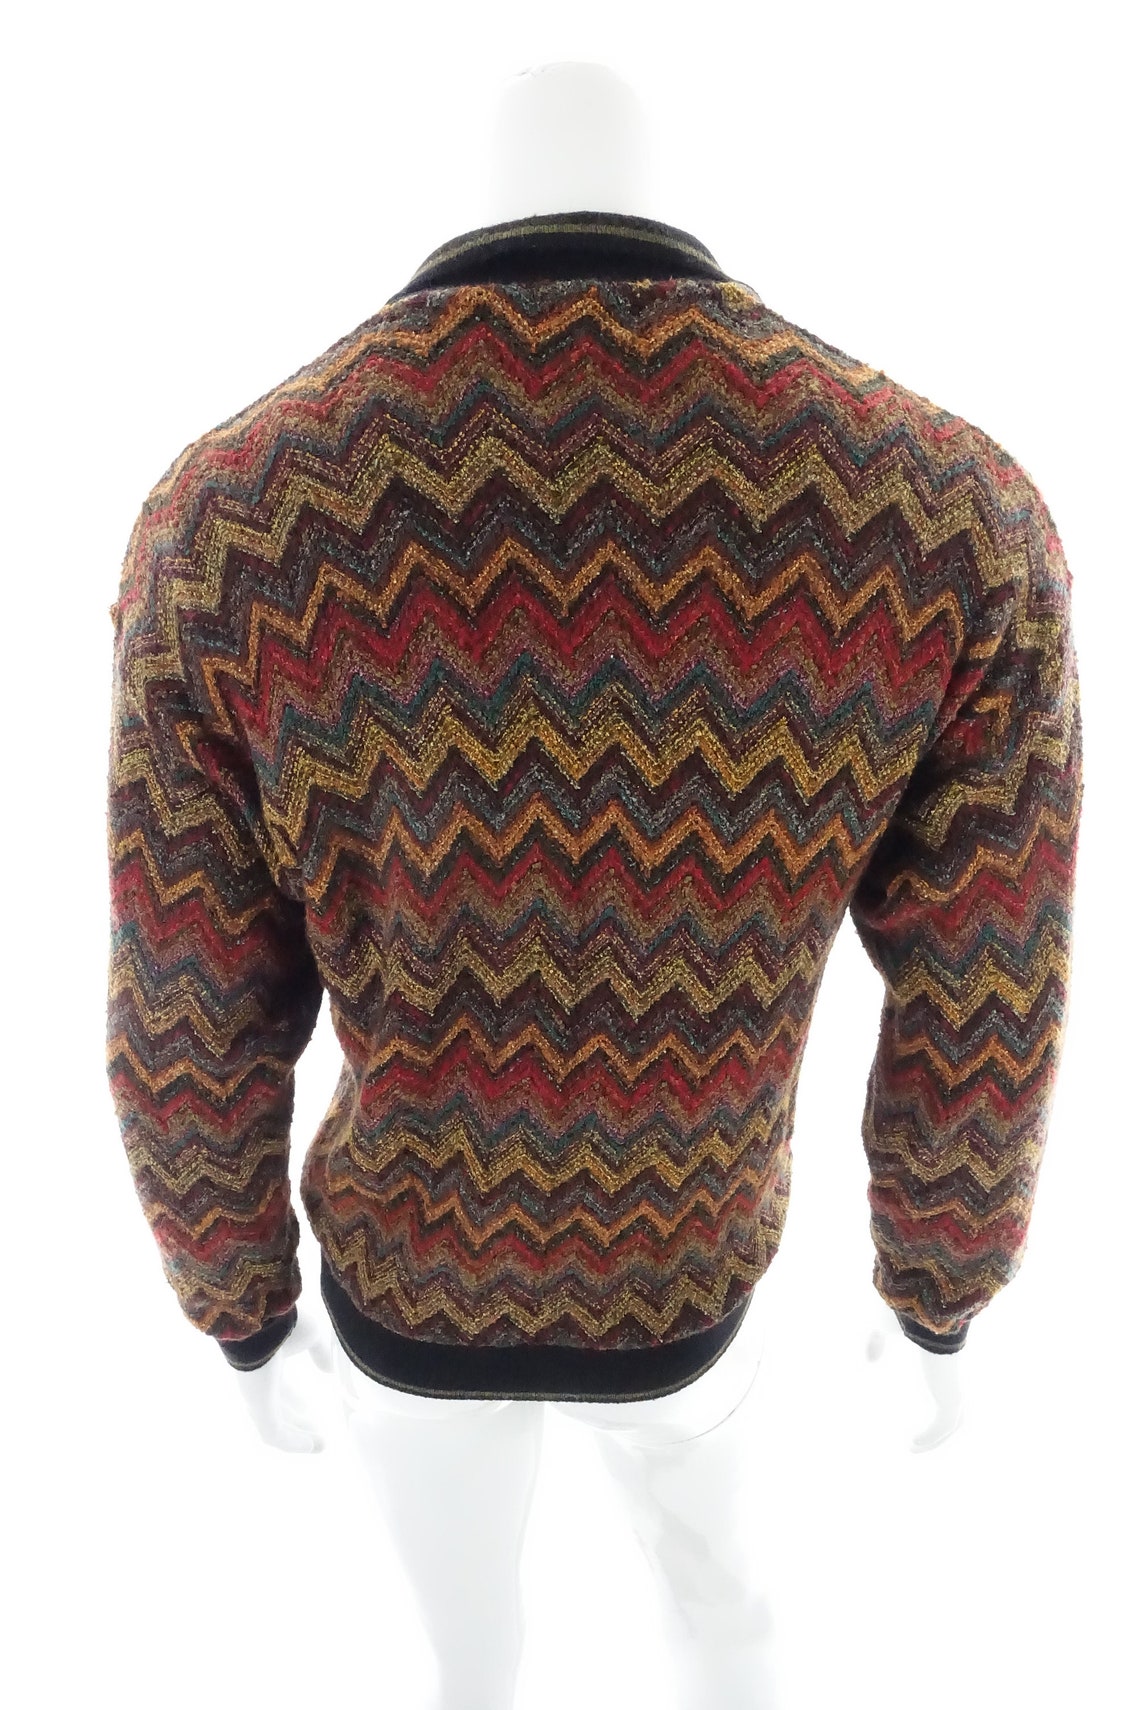 90s TUNDRA Sweater Men Vintage Colorful Chevron Knit Collared | Etsy